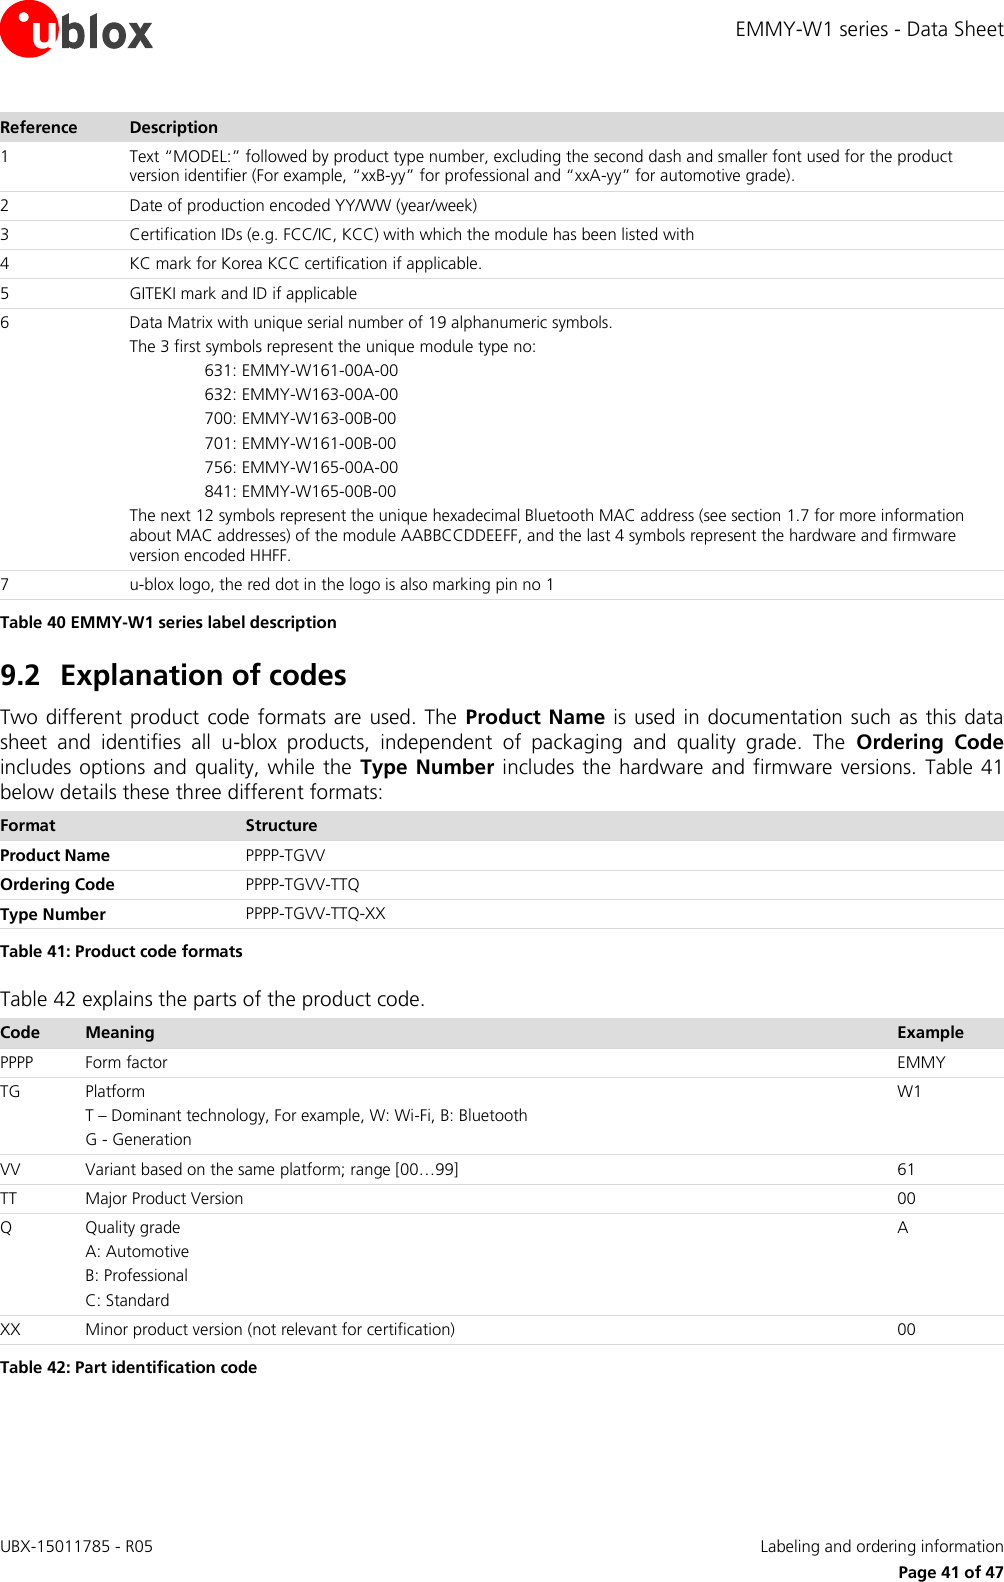 EMMY-W1 series - Data Sheet UBX-15011785 - R05   Labeling and ordering information     Page 41 of 47 Reference Description 1 Text “MODEL:” followed by product type number, excluding the second dash and smaller font used for the product version identifier (For example, “xxB-yy” for professional and “xxA-yy” for automotive grade). 2 Date of production encoded YY/WW (year/week) 3 Certification IDs (e.g. FCC/IC, KCC) with which the module has been listed with 4 KC mark for Korea KCC certification if applicable. 5 GITEKI mark and ID if applicable 6 Data Matrix with unique serial number of 19 alphanumeric symbols. The 3 first symbols represent the unique module type no: 631: EMMY-W161-00A-00 632: EMMY-W163-00A-00 700: EMMY-W163-00B-00 701: EMMY-W161-00B-00 756: EMMY-W165-00A-00 841: EMMY-W165-00B-00 The next 12 symbols represent the unique hexadecimal Bluetooth MAC address (see section 1.7 for more information about MAC addresses) of the module AABBCCDDEEFF, and the last 4 symbols represent the hardware and firmware version encoded HHFF. 7 u-blox logo, the red dot in the logo is also marking pin no 1 Table 40 EMMY-W1 series label description 9.2 Explanation of codes Two different product code formats are used. The  Product Name is used in documentation such as this data sheet  and  identifies  all  u-blox  products,  independent  of  packaging  and  quality  grade.  The  Ordering  Code includes options  and quality, while  the  Type  Number includes the hardware and firmware versions.  Table  41 below details these three different formats: Format Structure Product Name PPPP-TGVV Ordering Code PPPP-TGVV-TTQ Type Number PPPP-TGVV-TTQ-XX Table 41: Product code formats Table 42 explains the parts of the product code. Code Meaning Example PPPP Form factor EMMY TG Platform T – Dominant technology, For example, W: Wi-Fi, B: Bluetooth G - Generation W1 VV Variant based on the same platform; range [00…99] 61 TT Major Product Version 00 Q Quality grade A: Automotive B: Professional C: Standard A XX Minor product version (not relevant for certification) 00 Table 42: Part identification code 